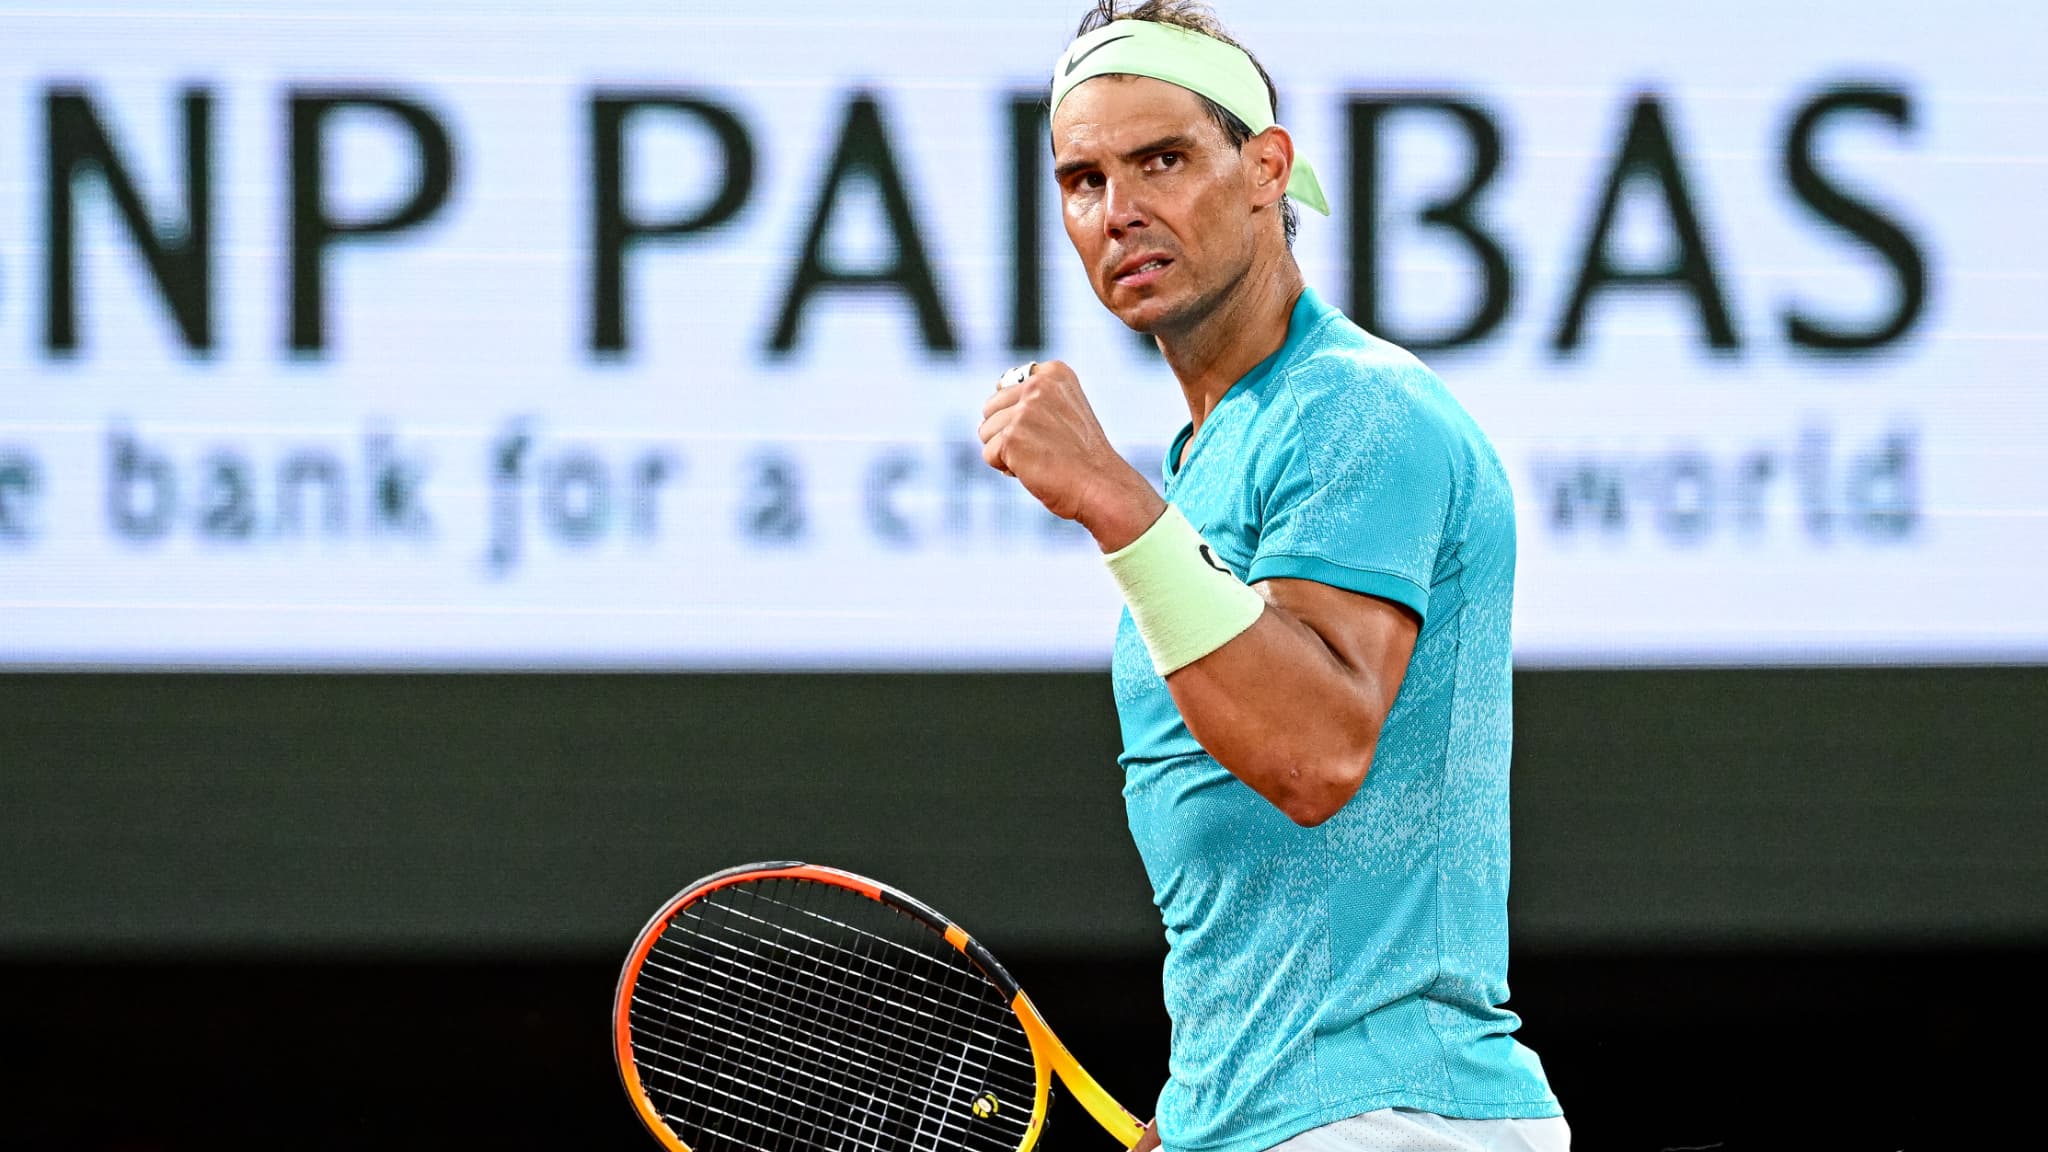 Rafael Nadal Reflects on RolandGarros Defeat and Uncertain Future